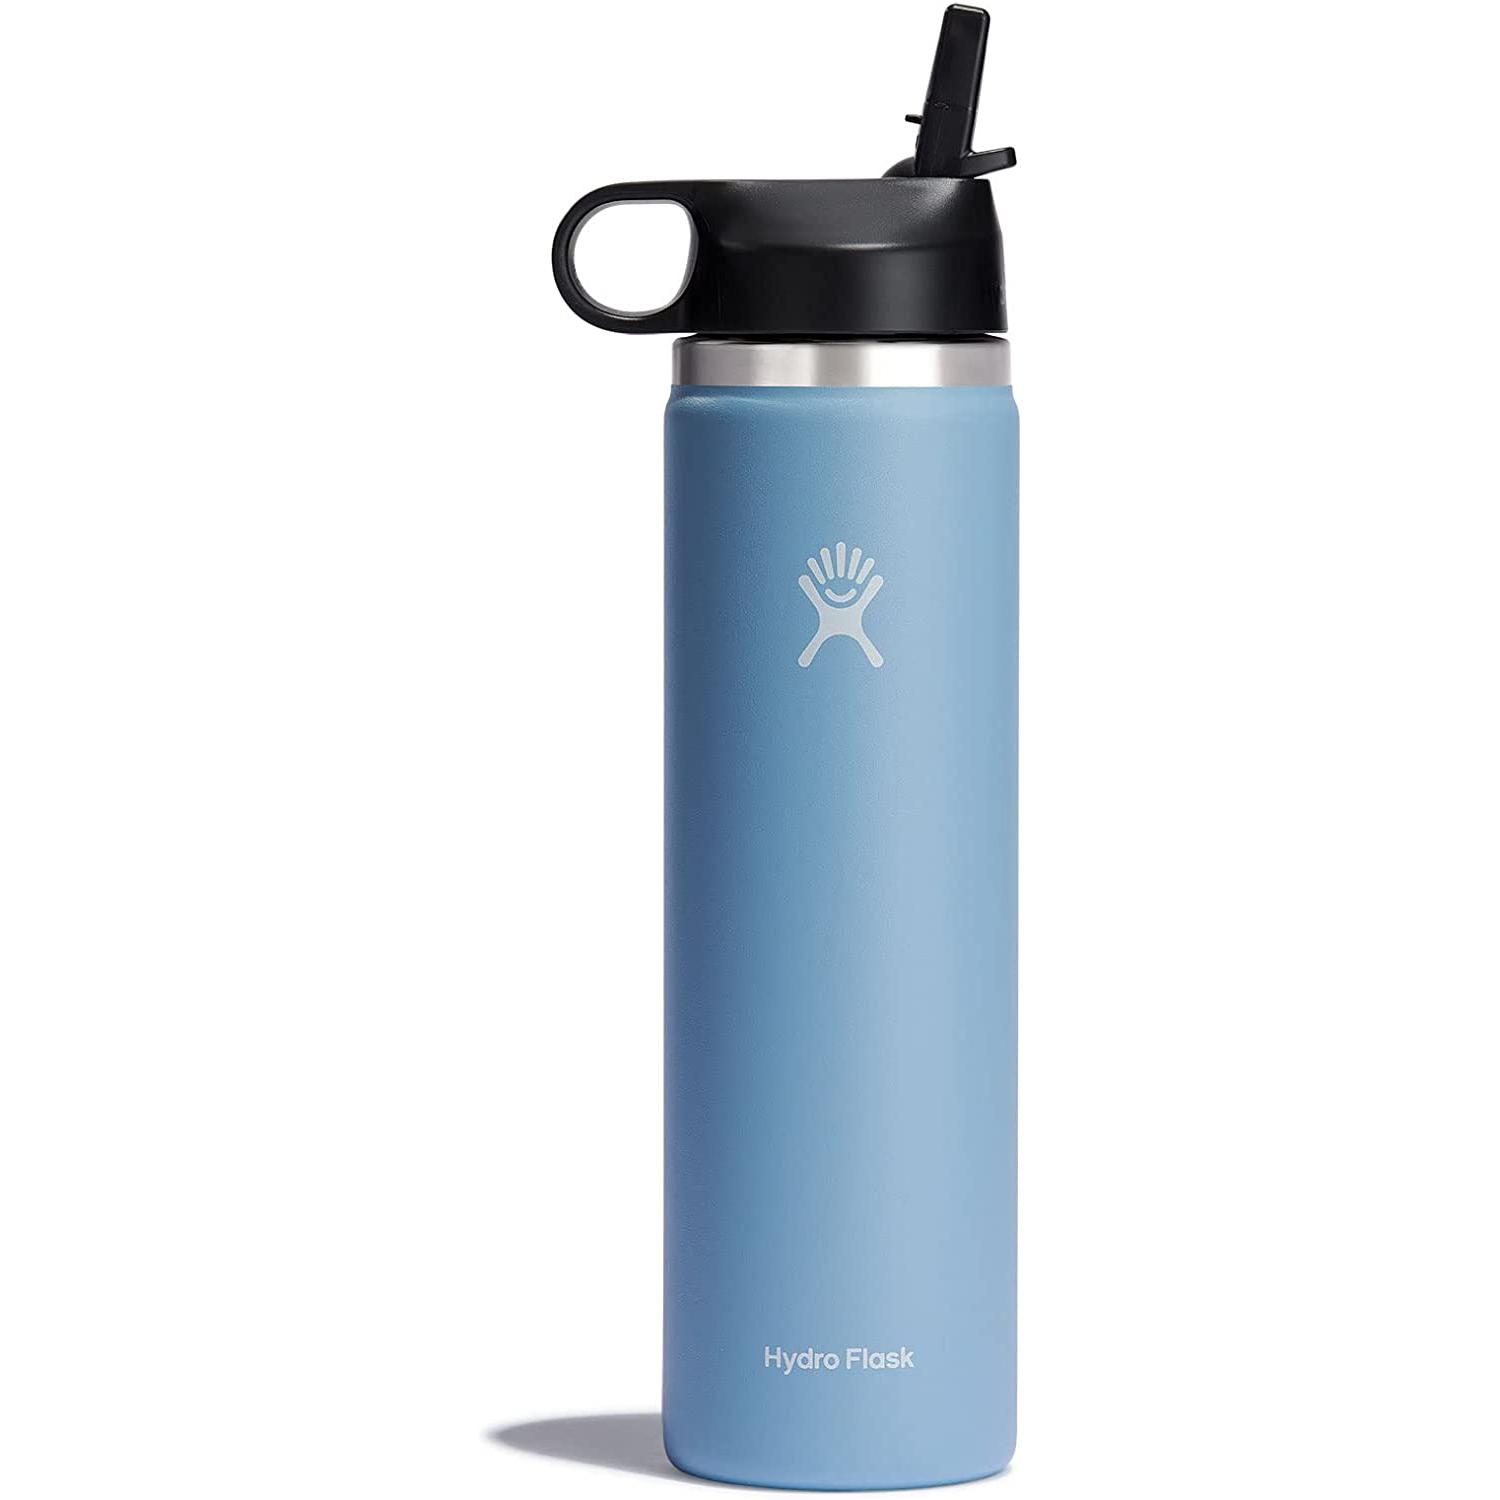 Hydro Flask 24oz Water Bottle for $20.96